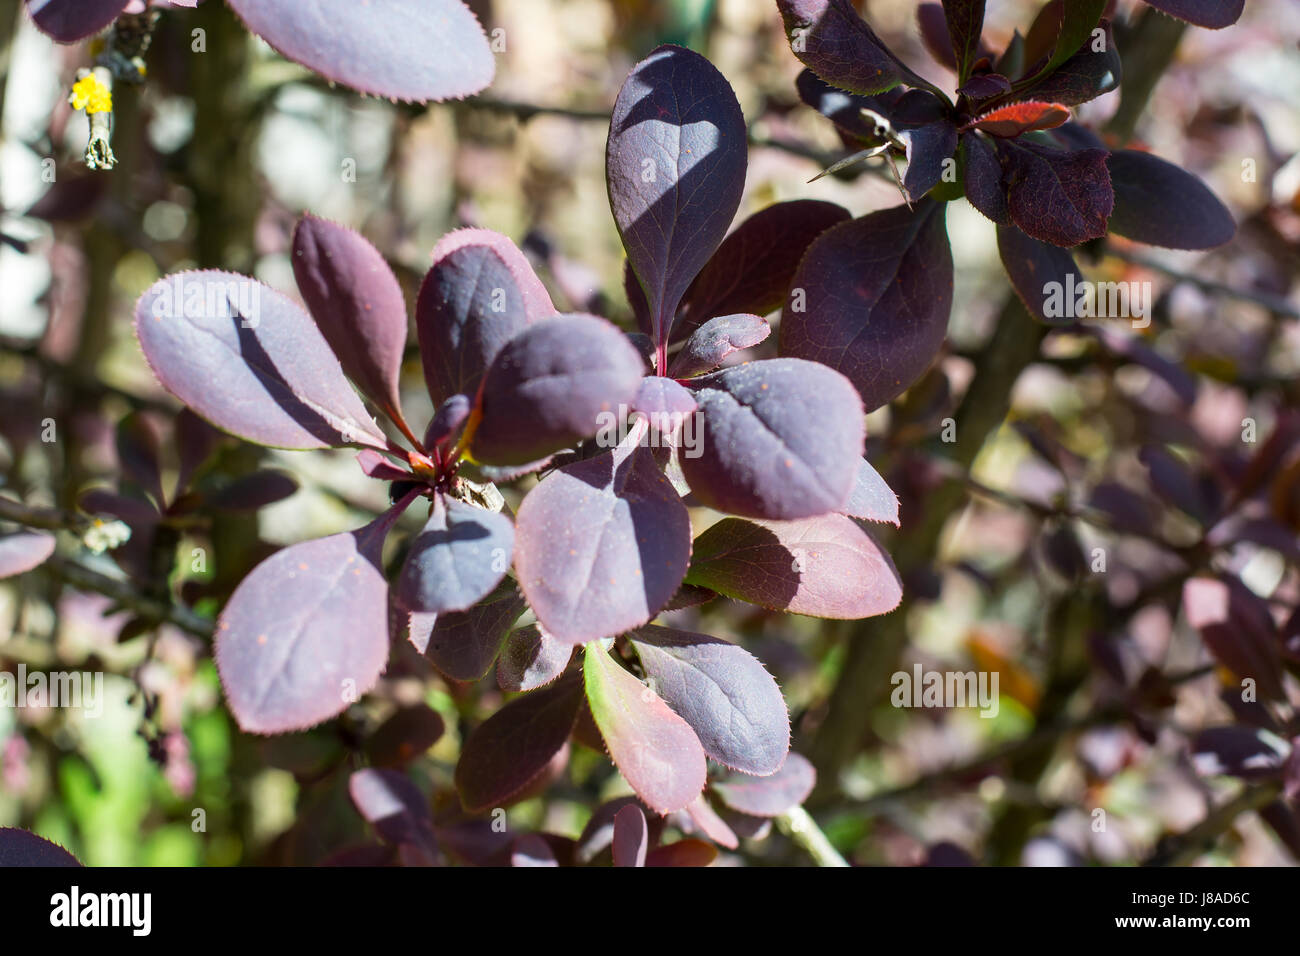 Garden evergreen shrub barberry with red leaves Stock Photo